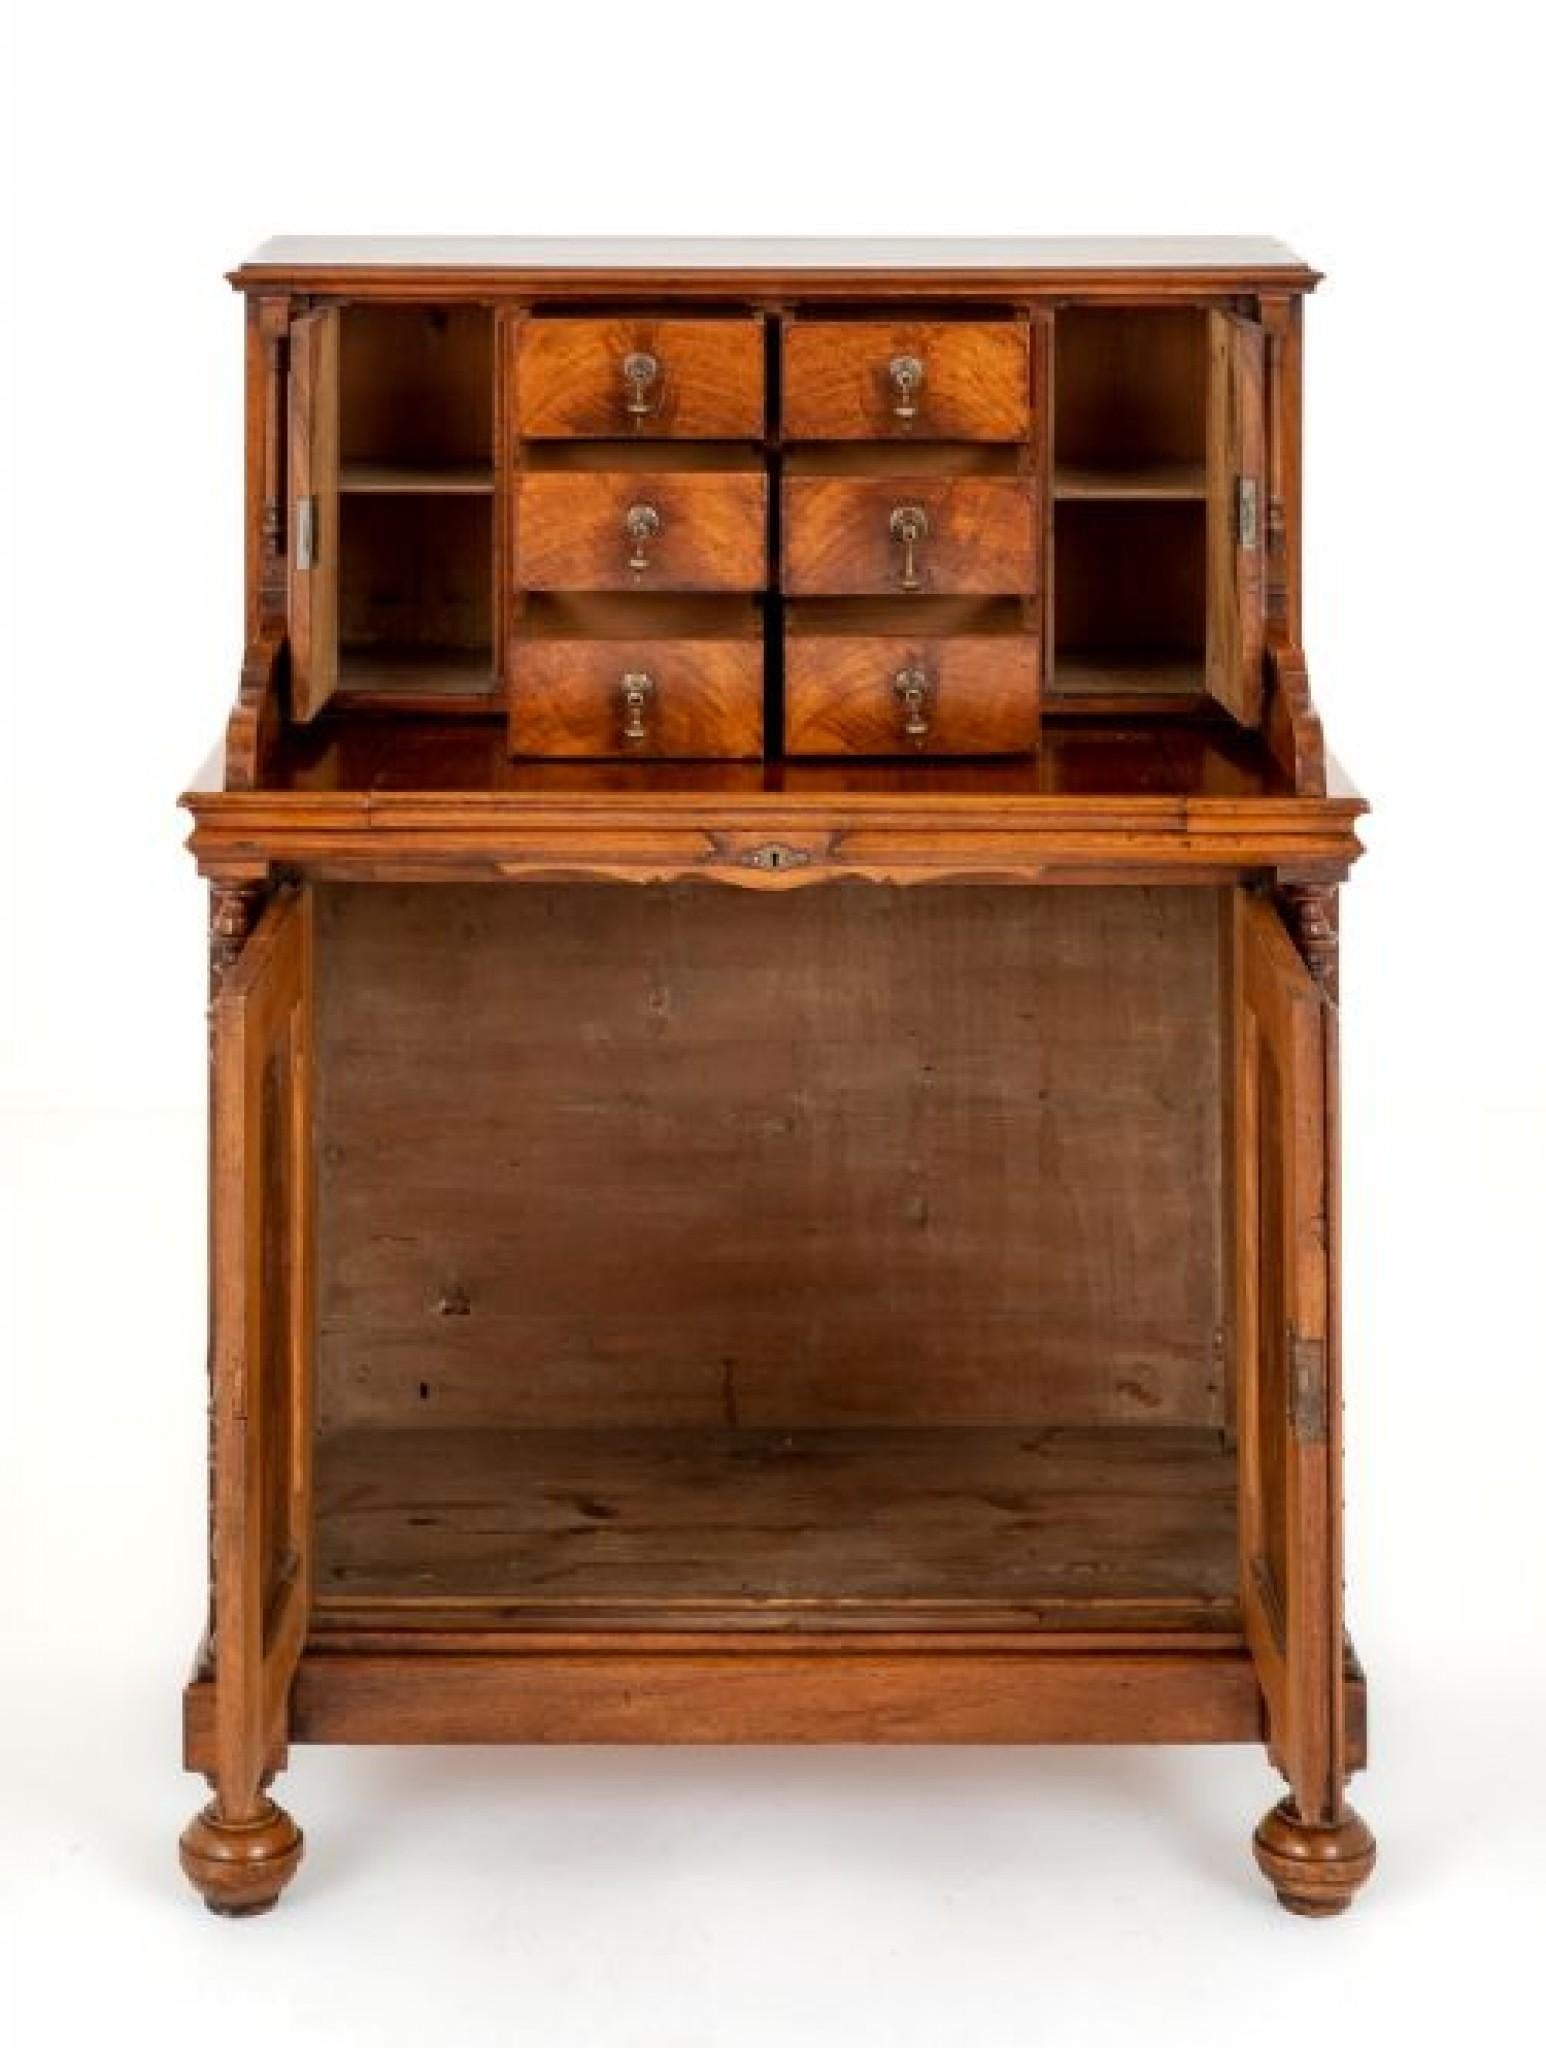 An Unusual French Walnut Dressing Table.
Standing upon Turned Feet.
Circa 1880
Featuring 2 Paneled Doors Flanked by Turned Columns.
The Upper Section Having 6 Drawers Flanked by Cupboards.
The Dressing Table Features a Slide Out Mirror.